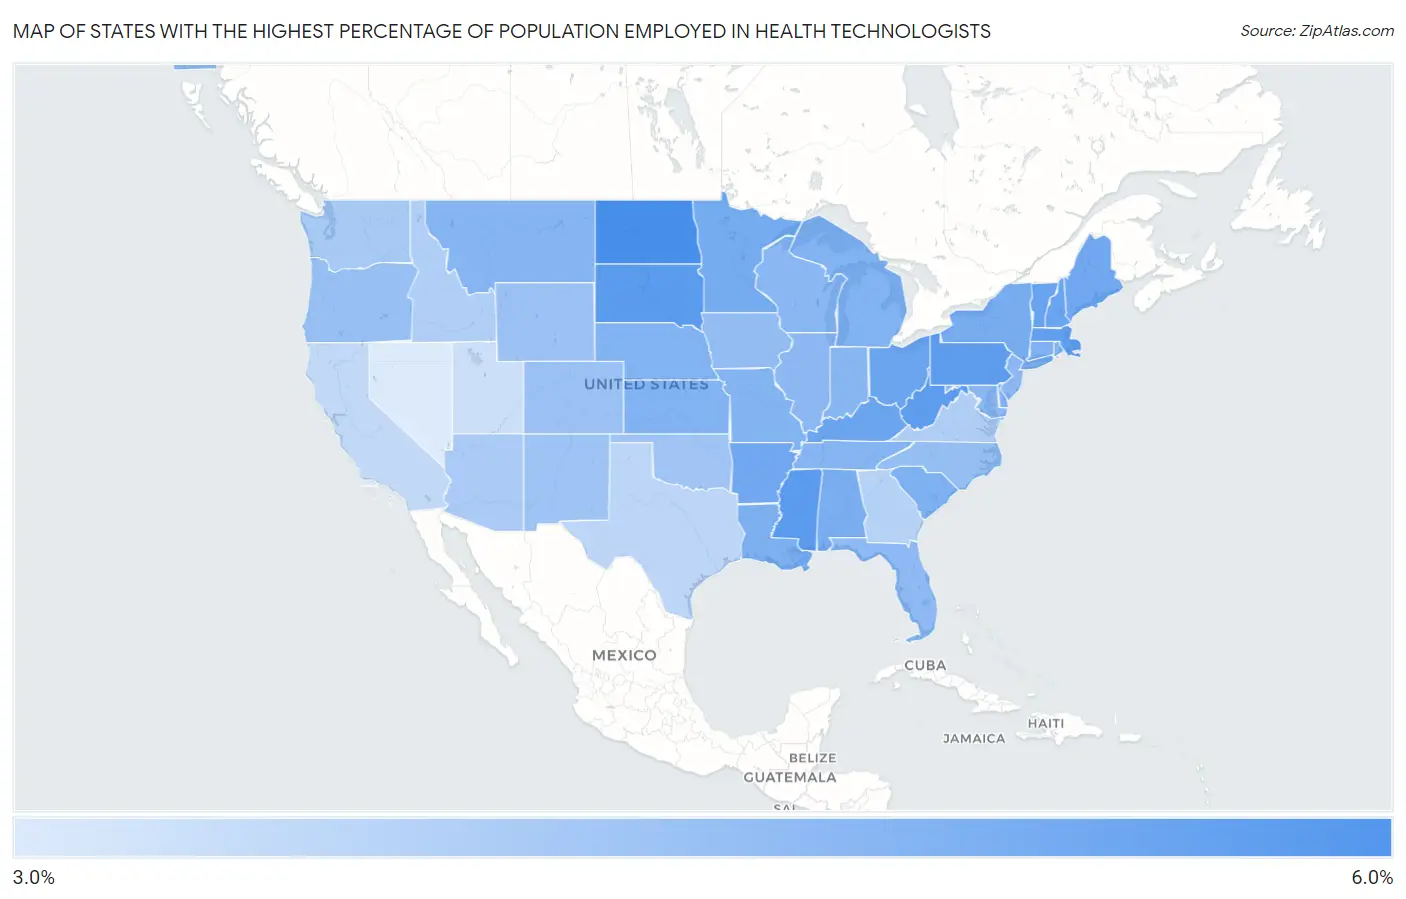 States with the Highest Percentage of Population Employed in Health Technologists in the United States Map